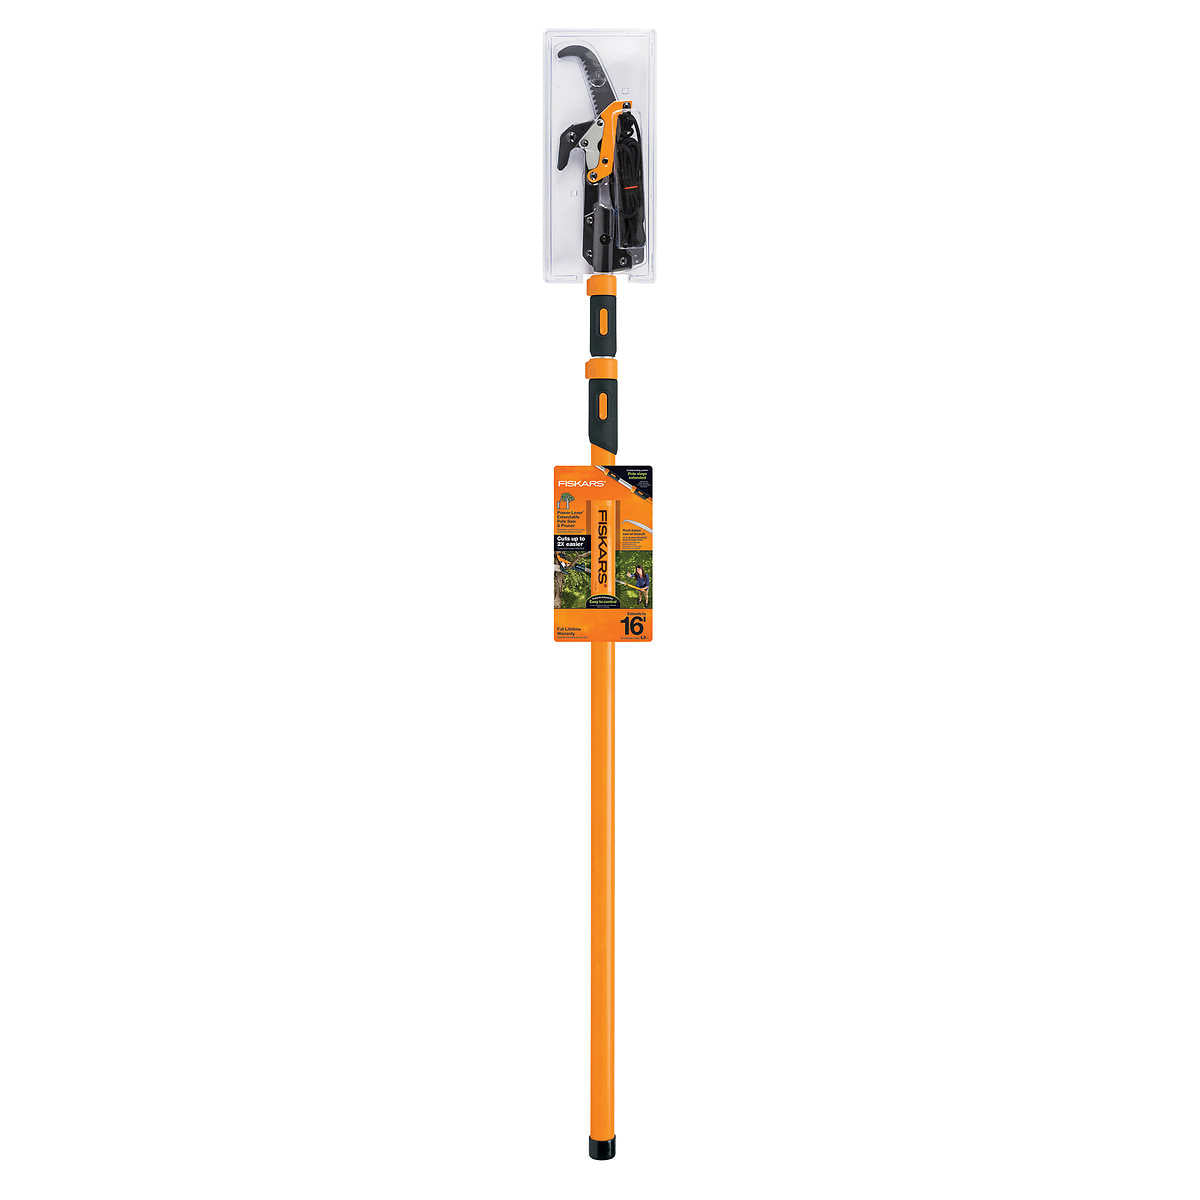 Costco - Power-lever Extendable Pole Saw & Pruner, 7' - 16' - Retail $70